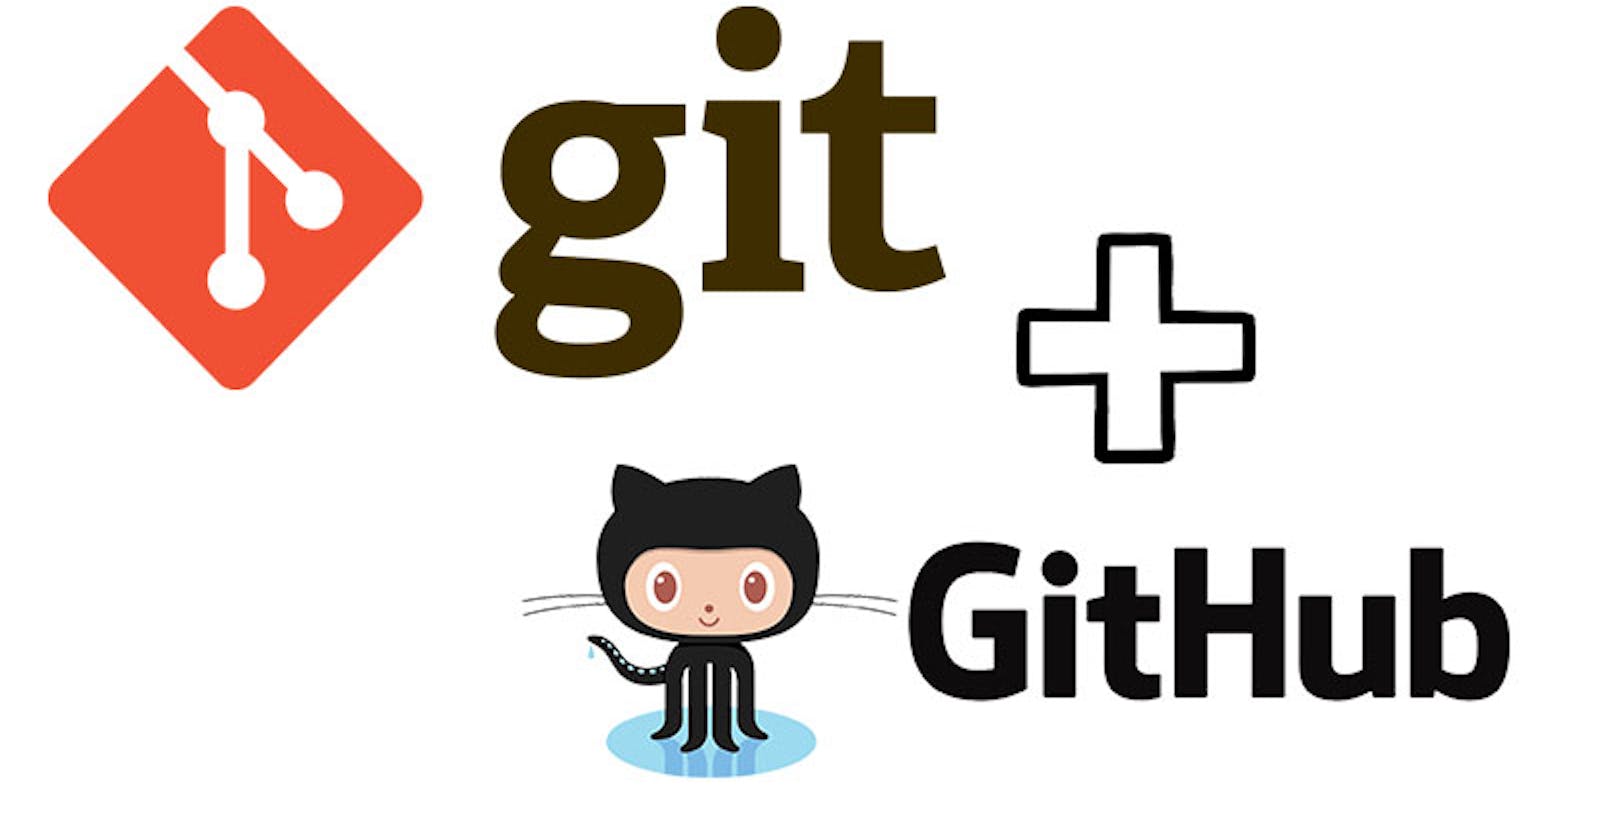 Getting Started with Git & GitHub